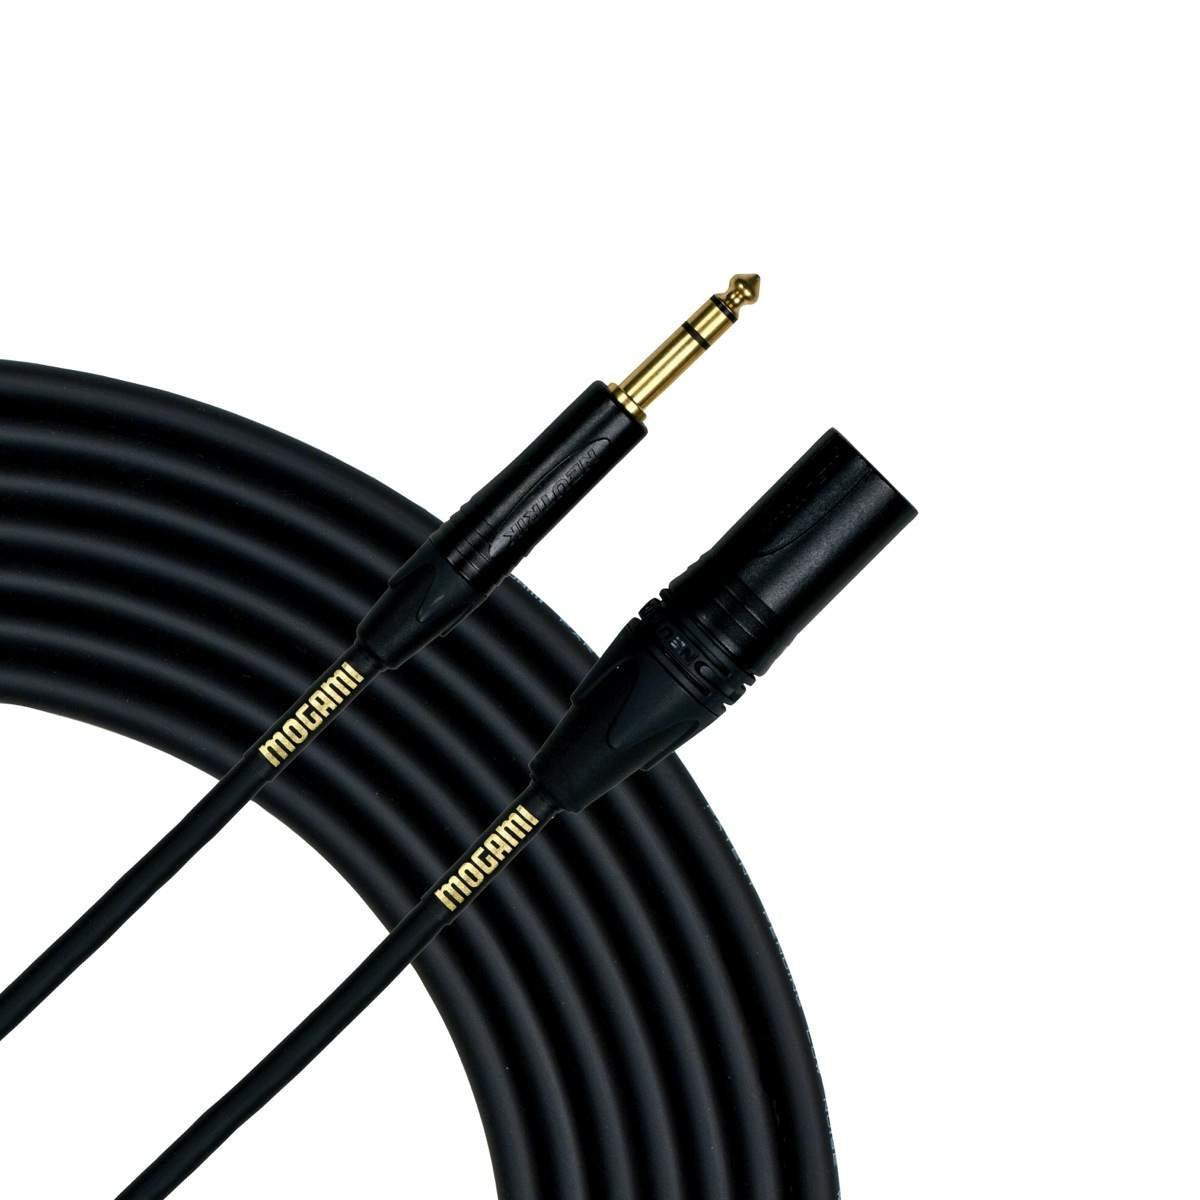 Mogami Gold 25' 1/4"" TRS Male to 3-Pin XLR Male Balanced Quad Patch Cable